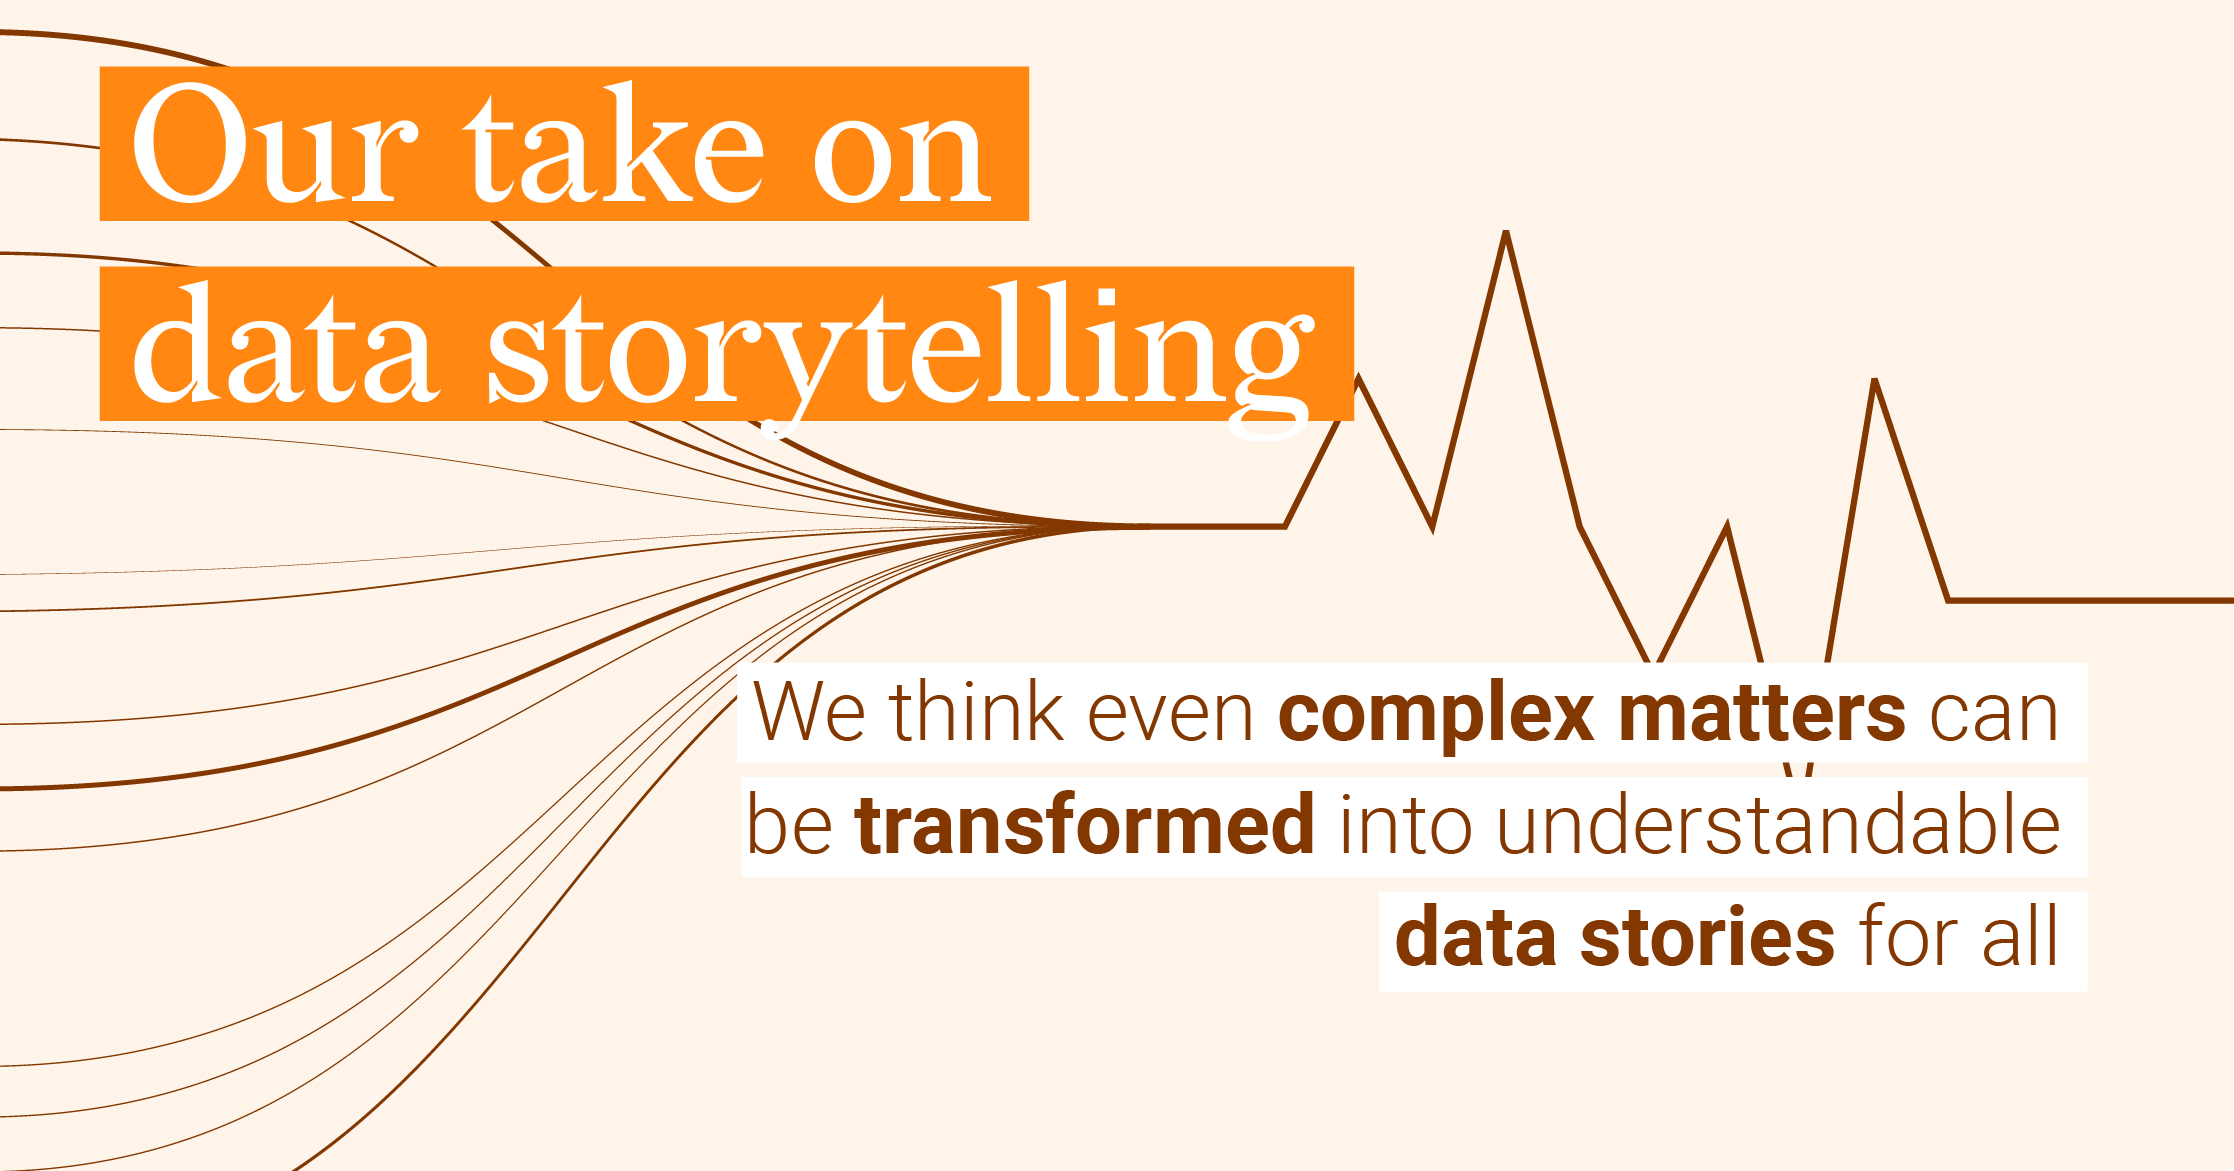 Datylon Blog - Our take on data storytelling - we think even complex matters can be transformed into understandable data stories for all